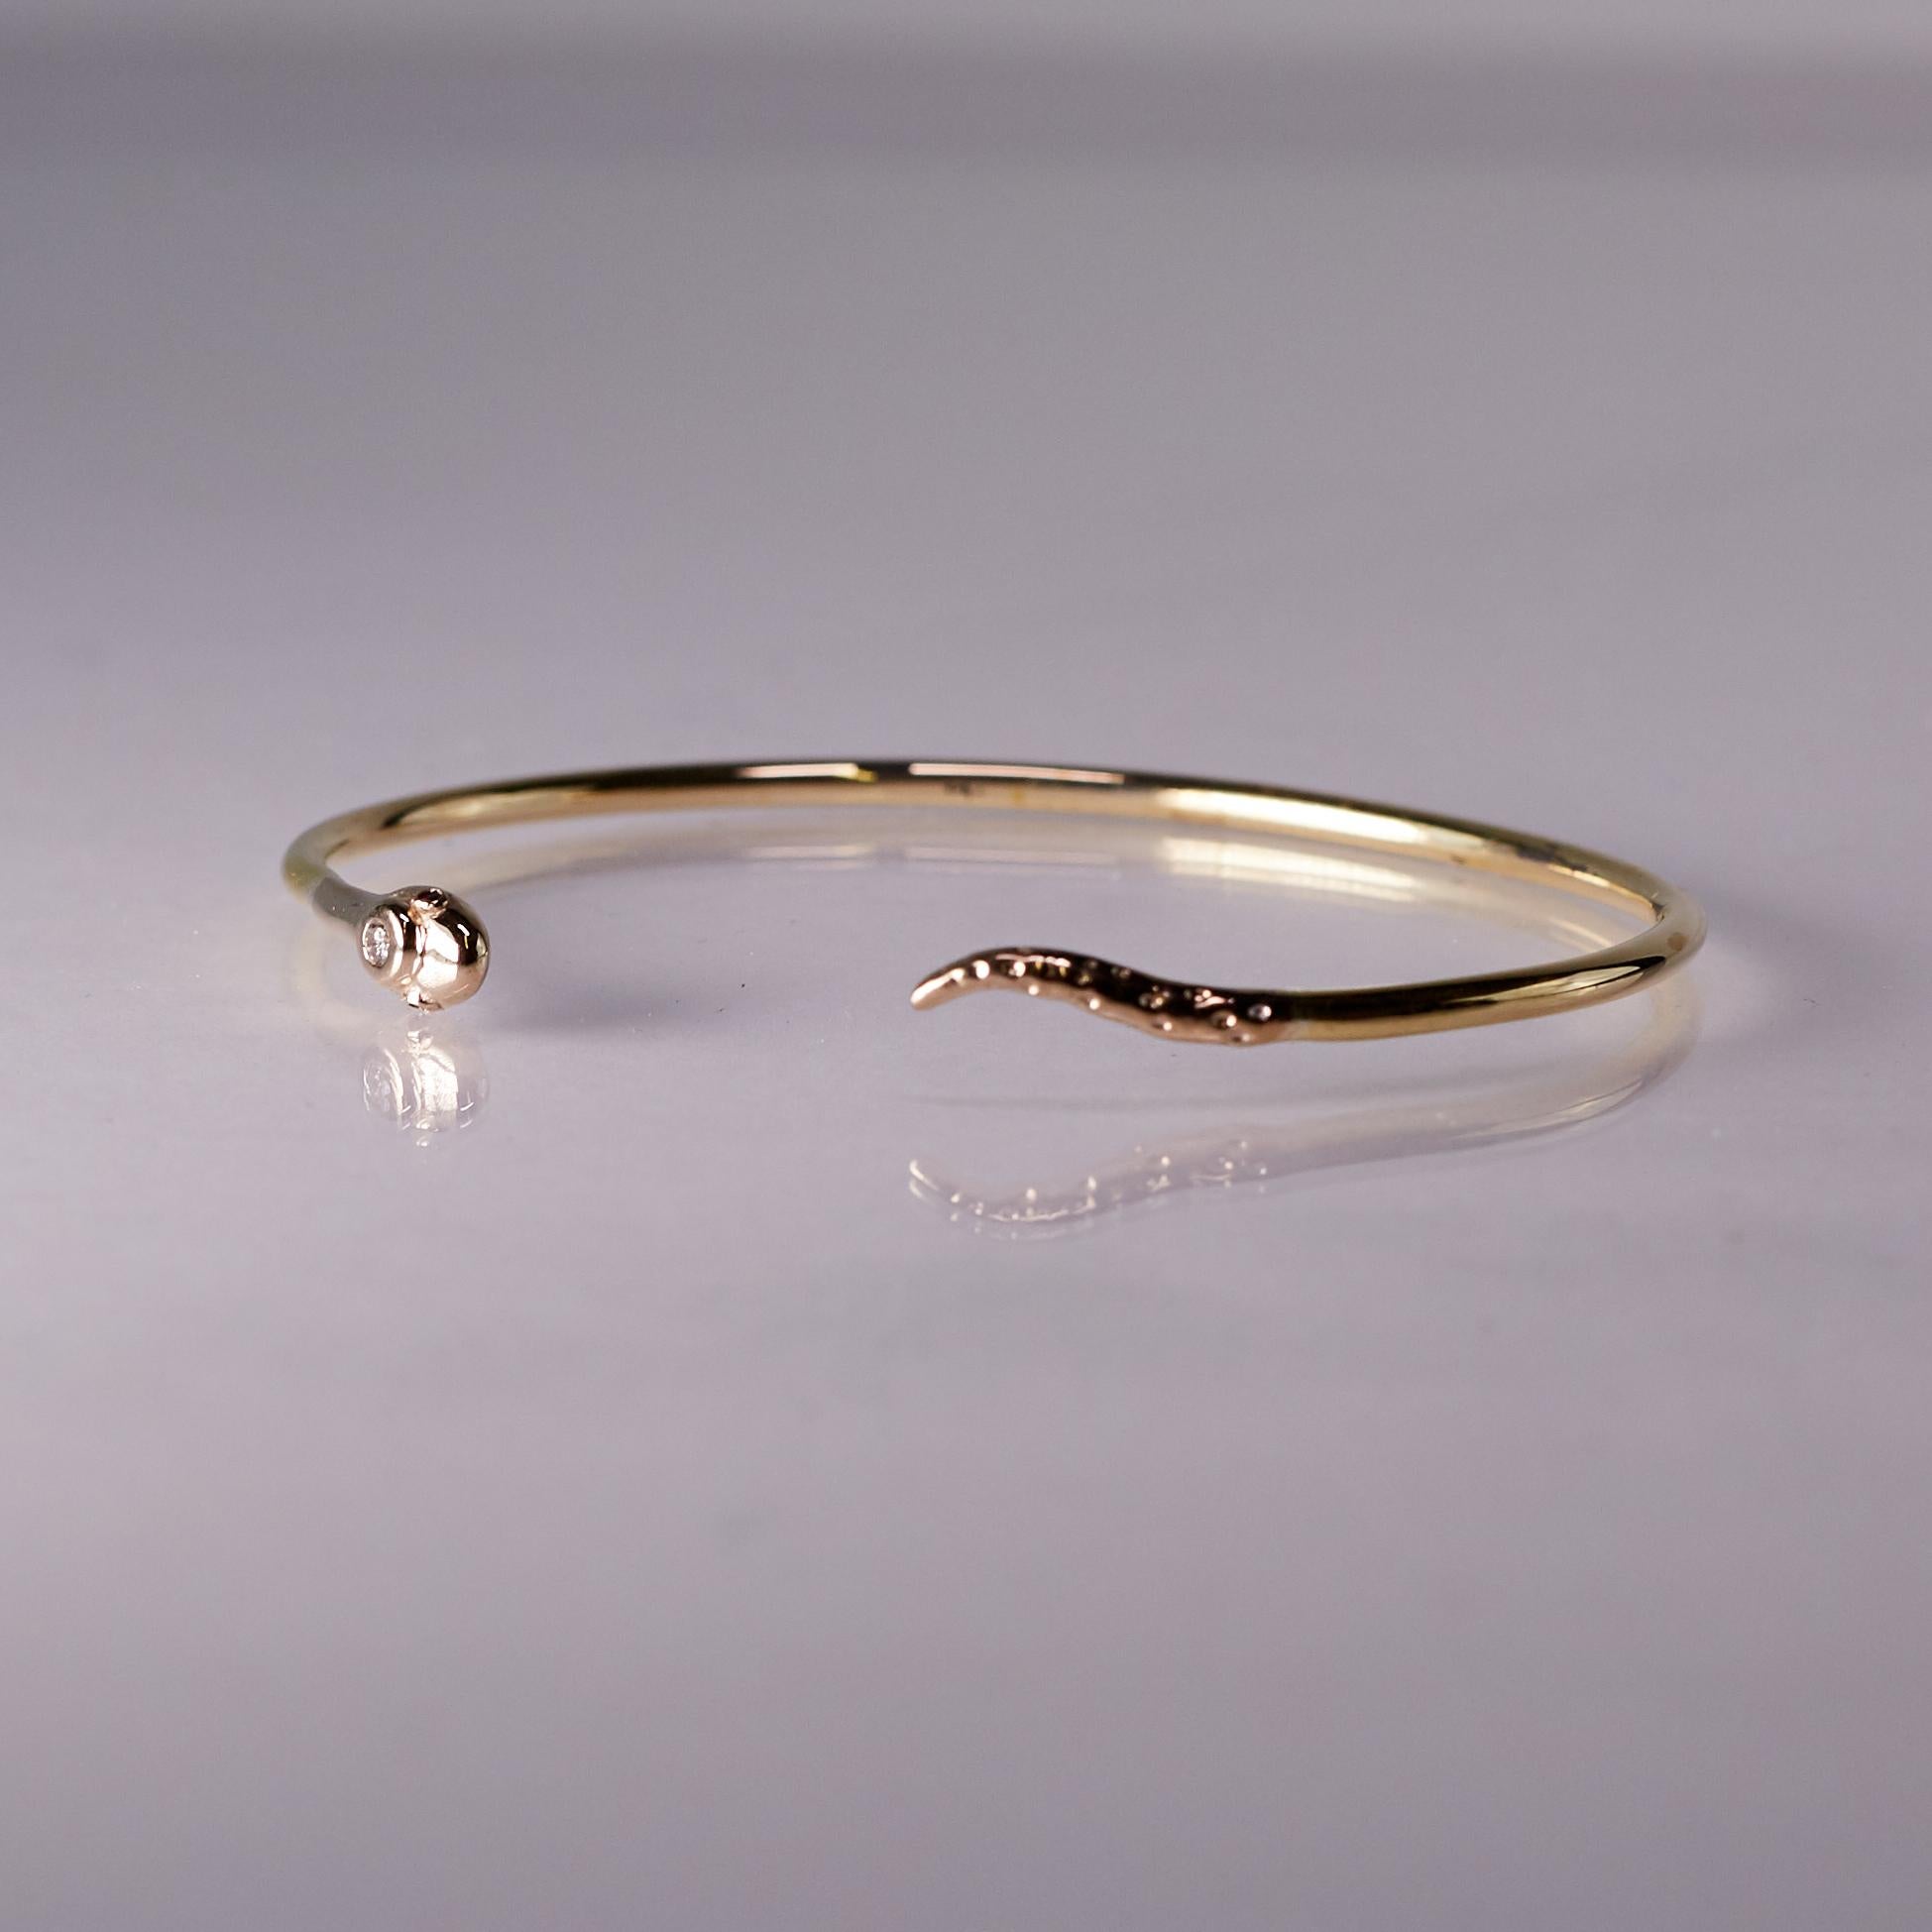 White Diamond Snake Bracelet Bangle 18 Karat Yellow Gold Ruby Eyes J Dauphin In New Condition For Sale In Los Angeles, CA